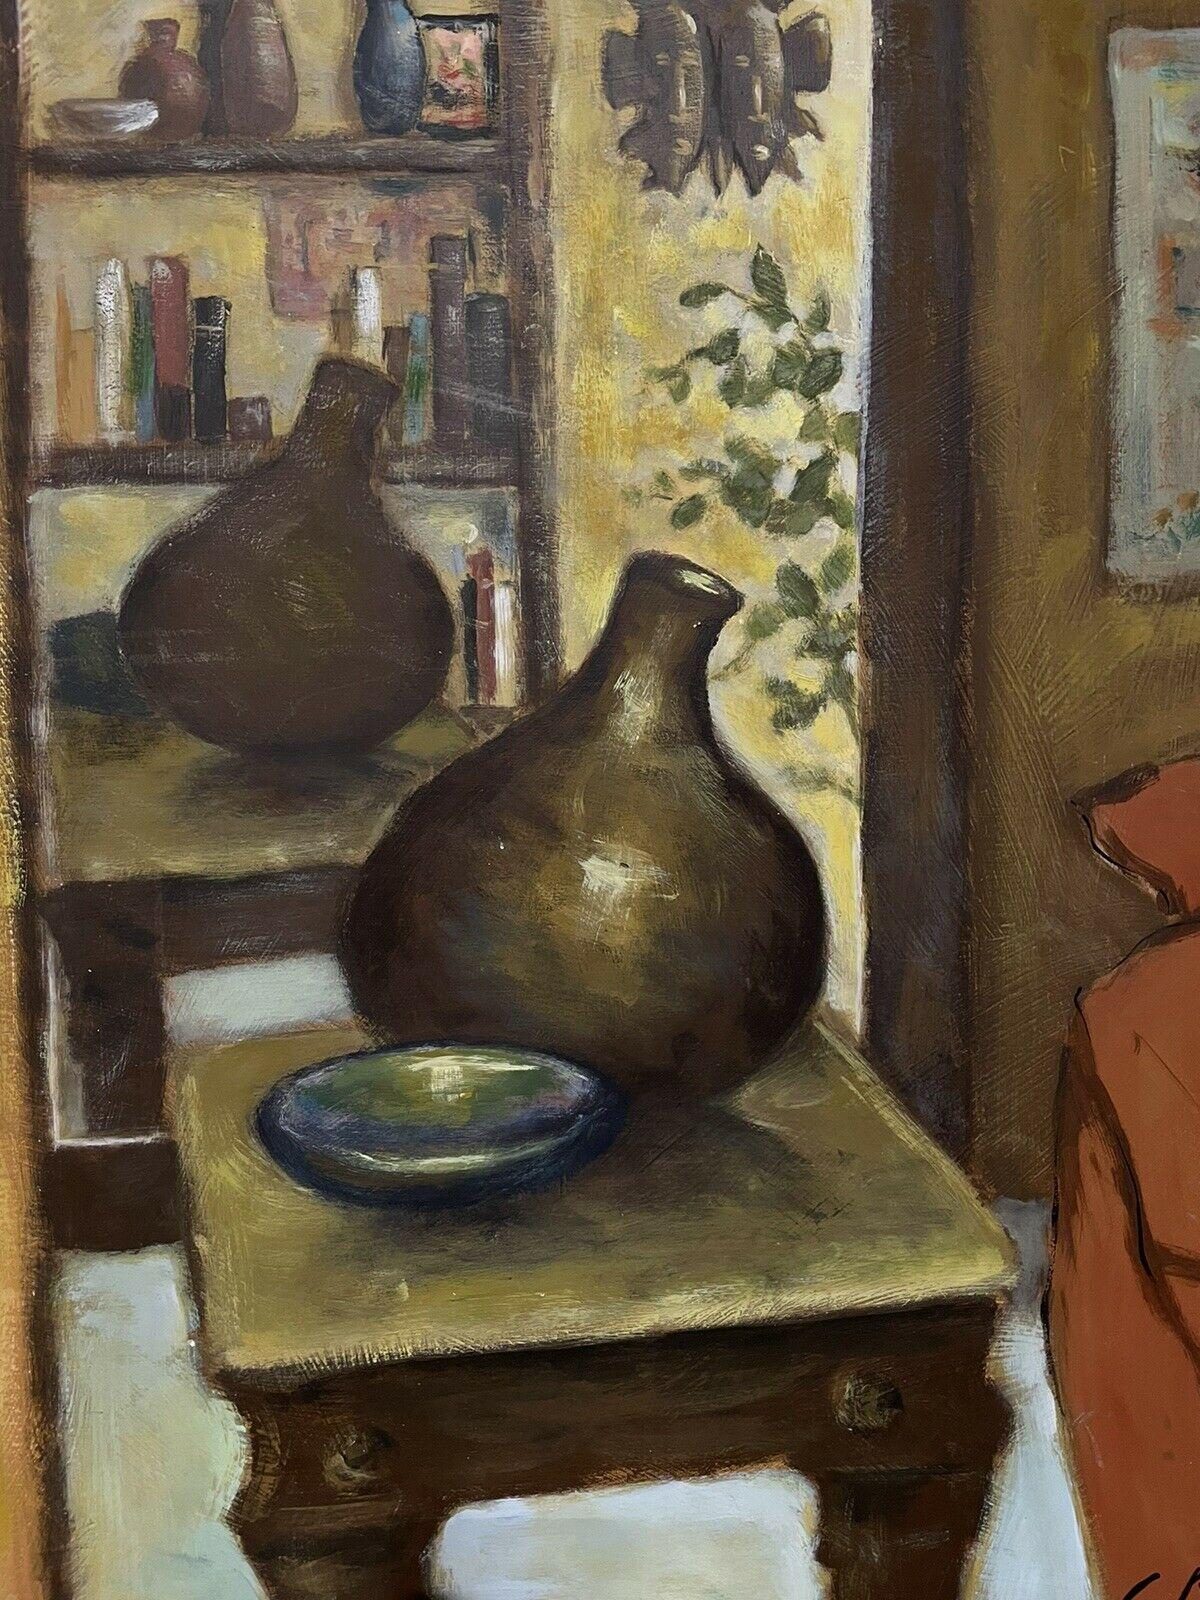 Artist/ School: French School, mid 20th century

Title: Interior scene

Medium: signed oil painting on board, unframed.

Size: board: 28.75 x 21.25 inches

Provenance: private collection, France

Condition: The painting is in overall very good and